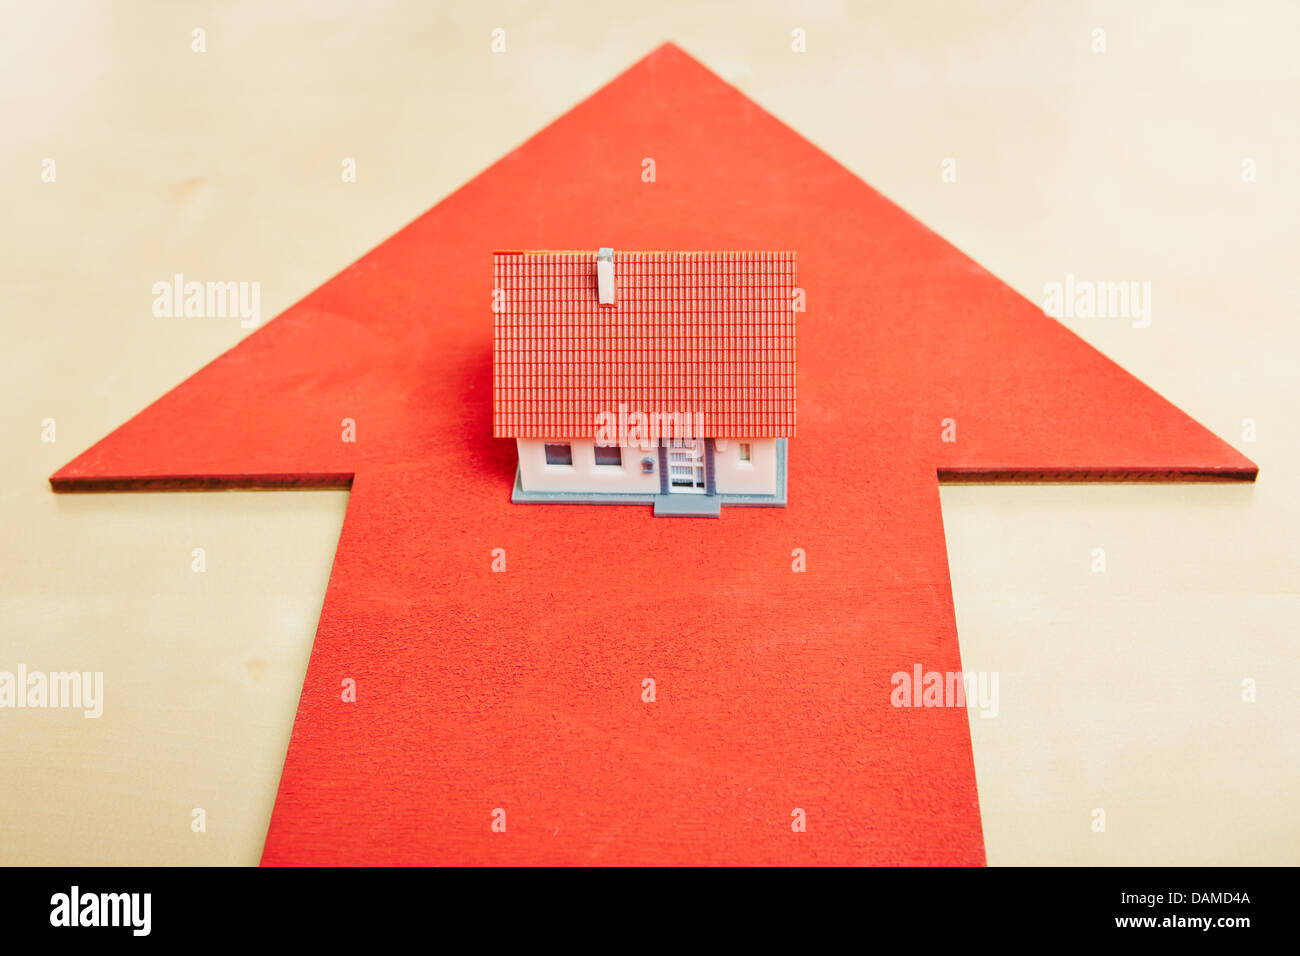 Little house standing on a big red arrow Stock Photo